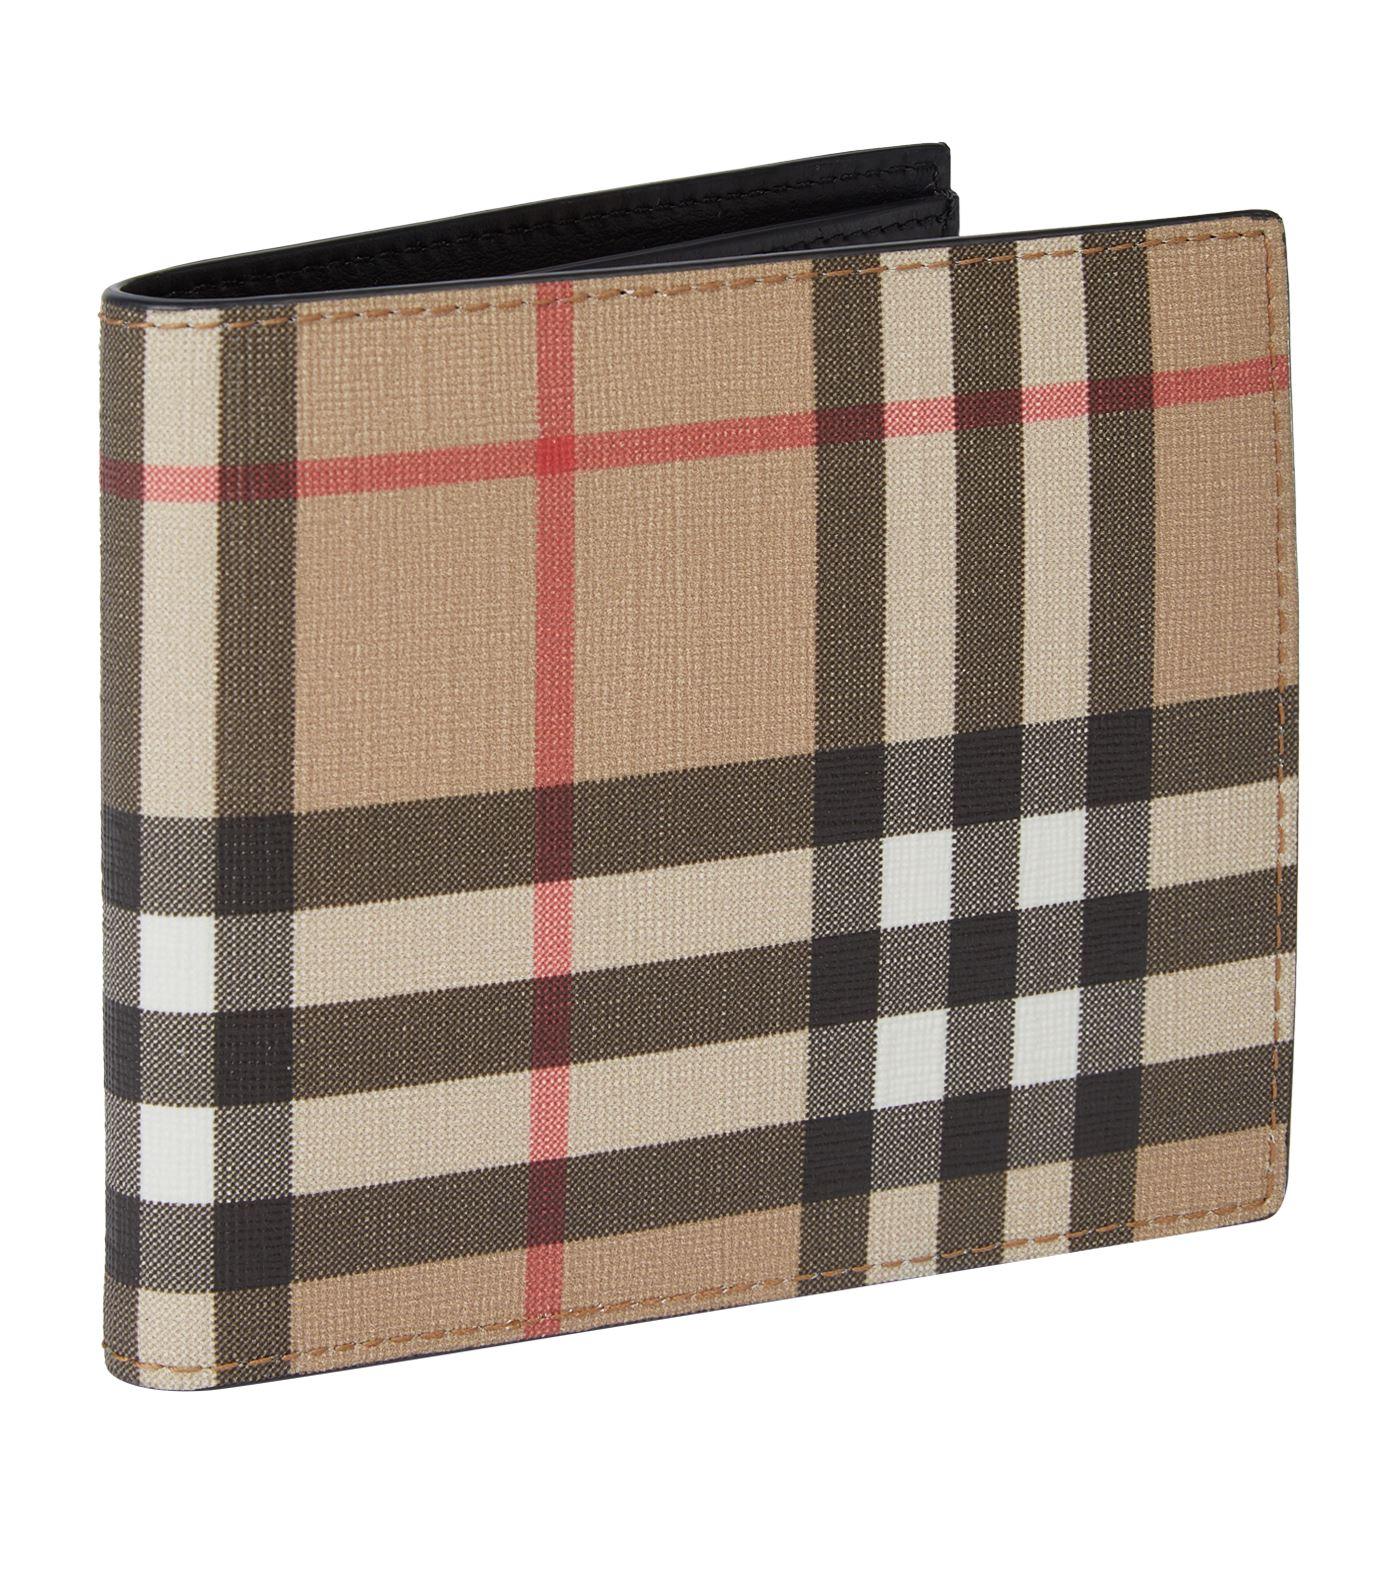 Burberry Vintage Check E-canvas Continental Wallet in Brown 